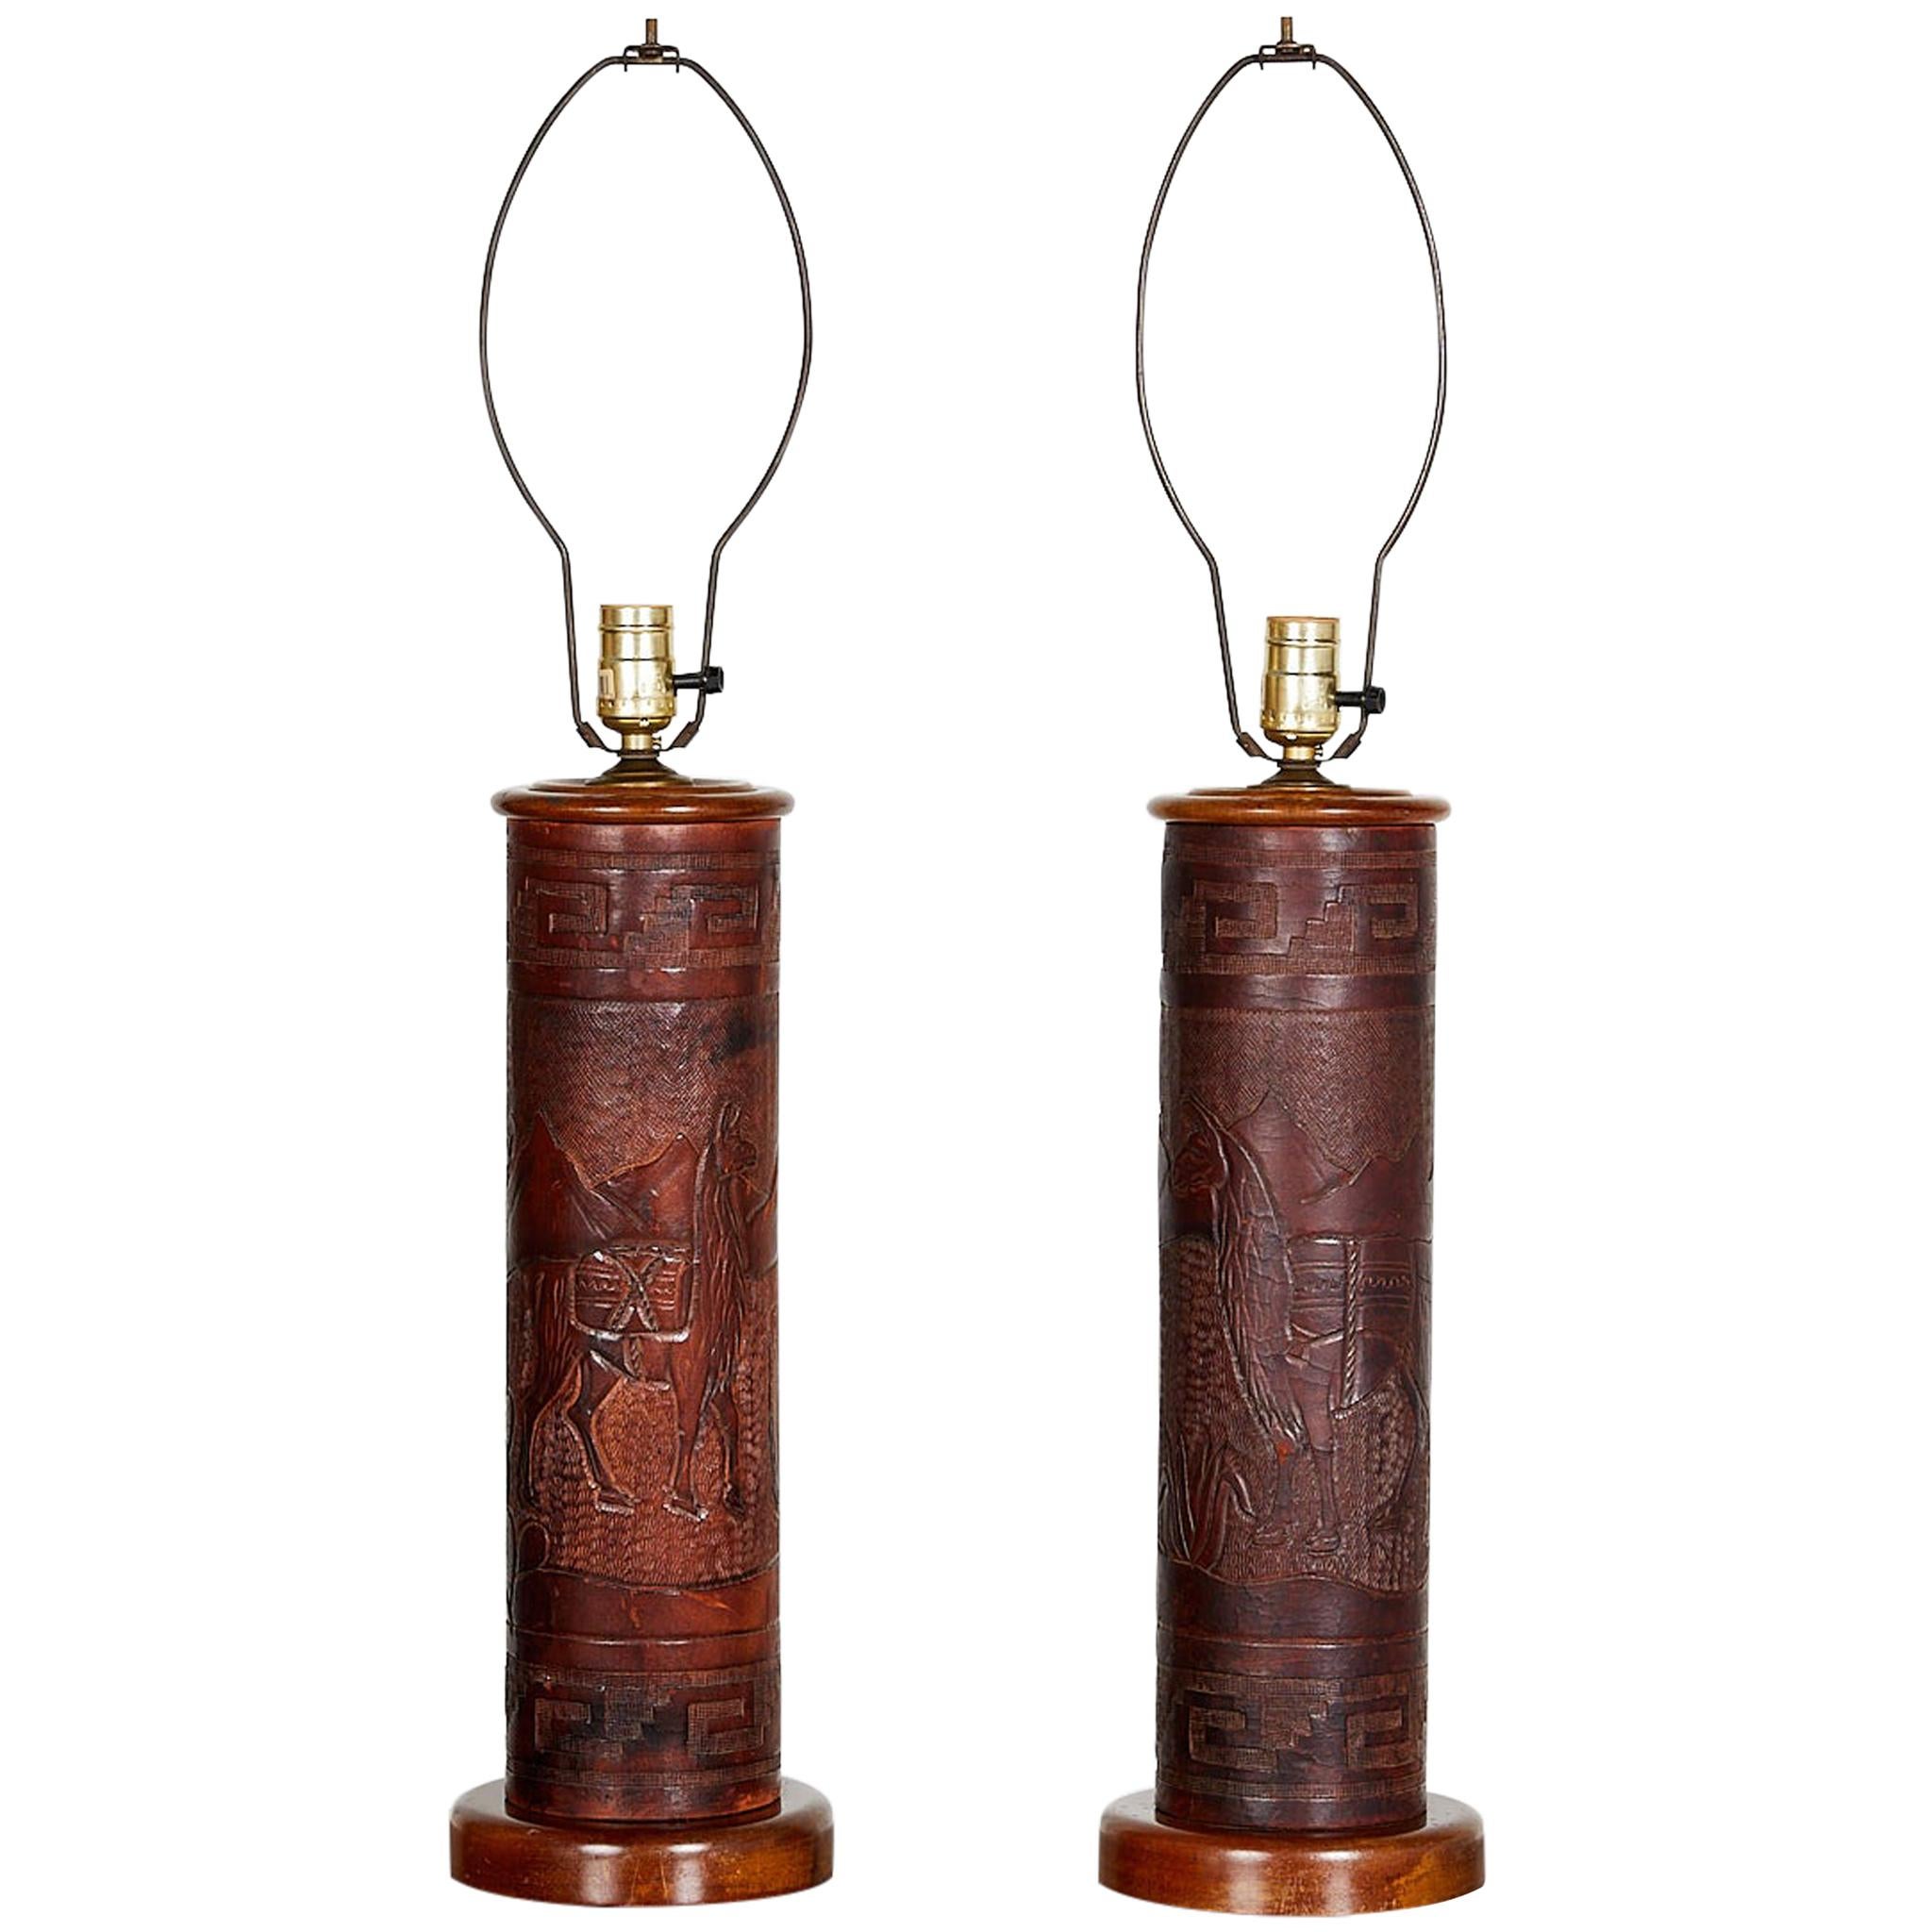 Pair of Vintage Peruvian Leather Lamps with Llama and Greek Key Decorations